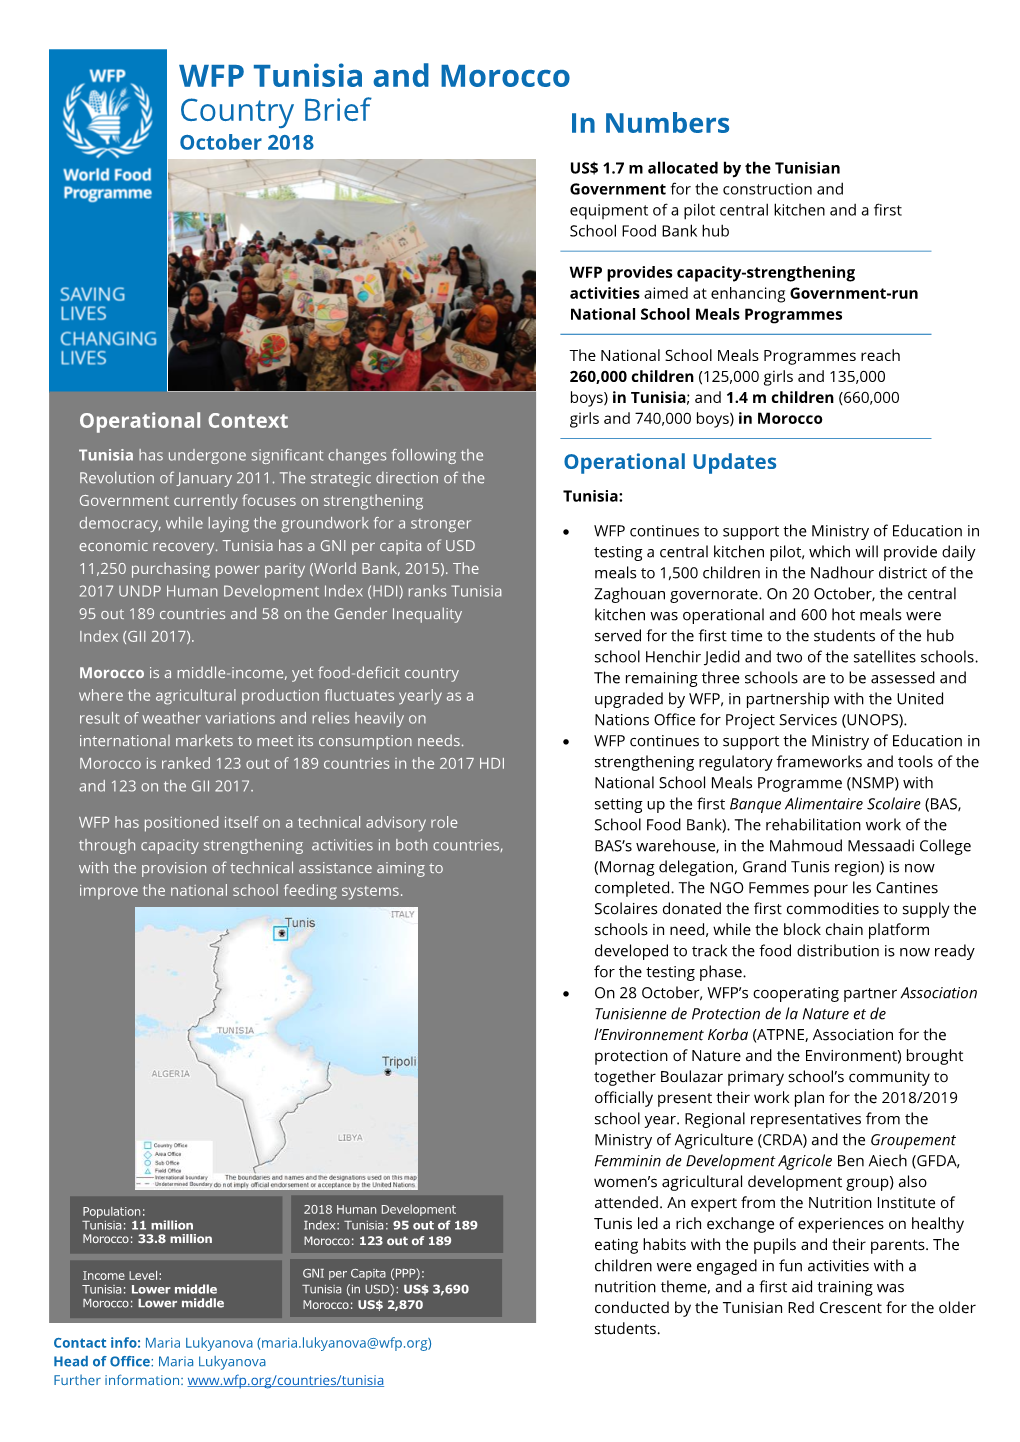 WFP Tunisia and Morocco Country Brief October 2018